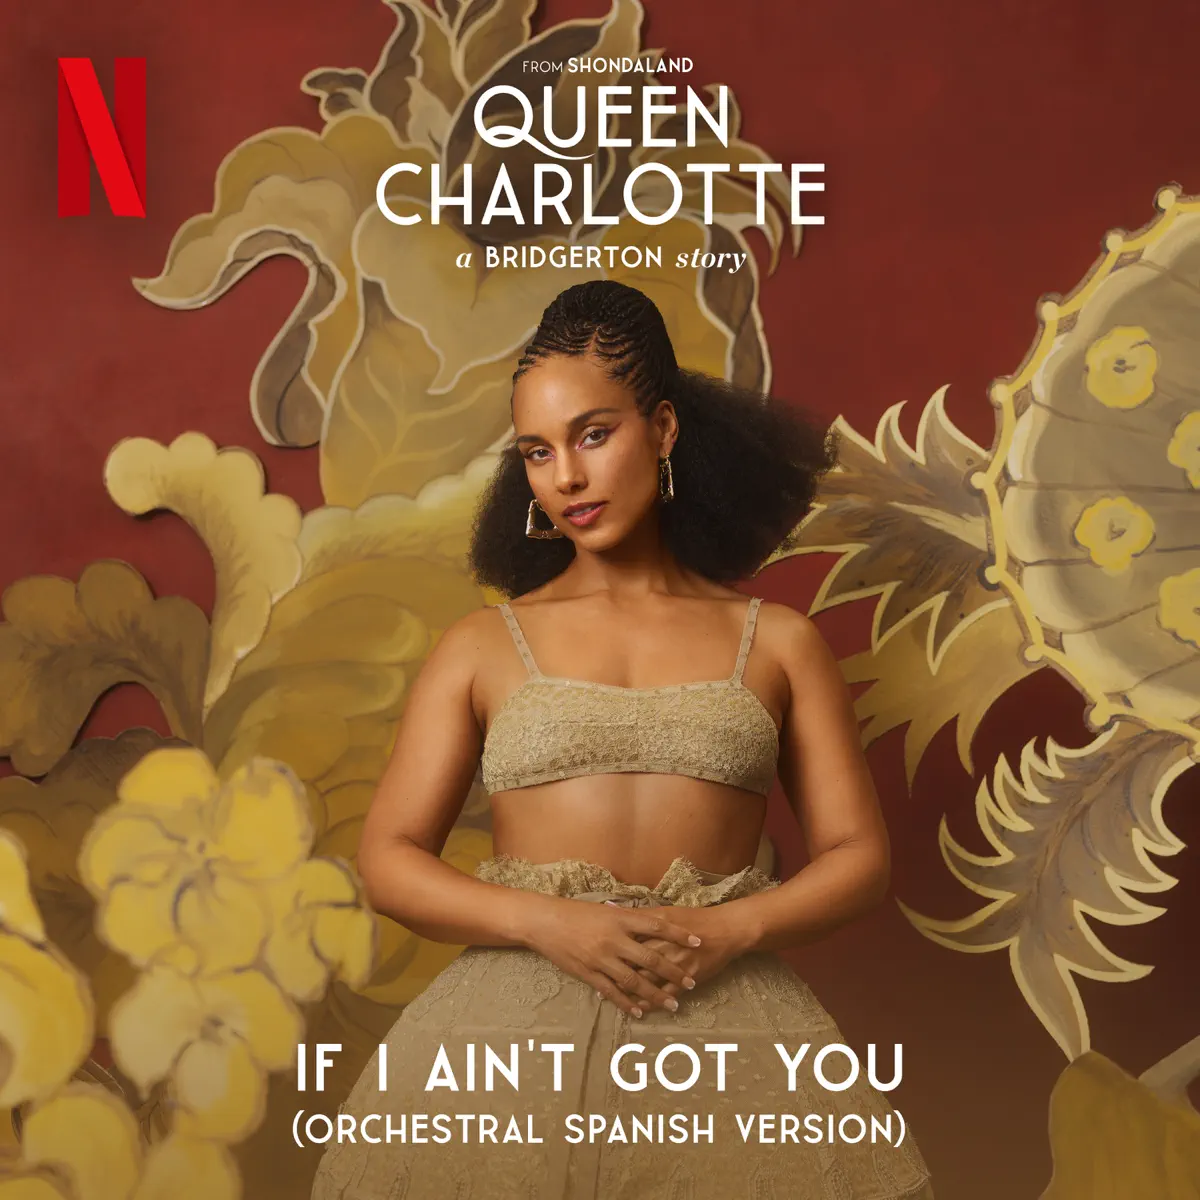 Alicia Keys - If I Ain't Got You (Spanish Version) [feat. Queen Charlotte's Global Orchestra] - Single (2023) [iTunes Plus AAC M4A]-新房子